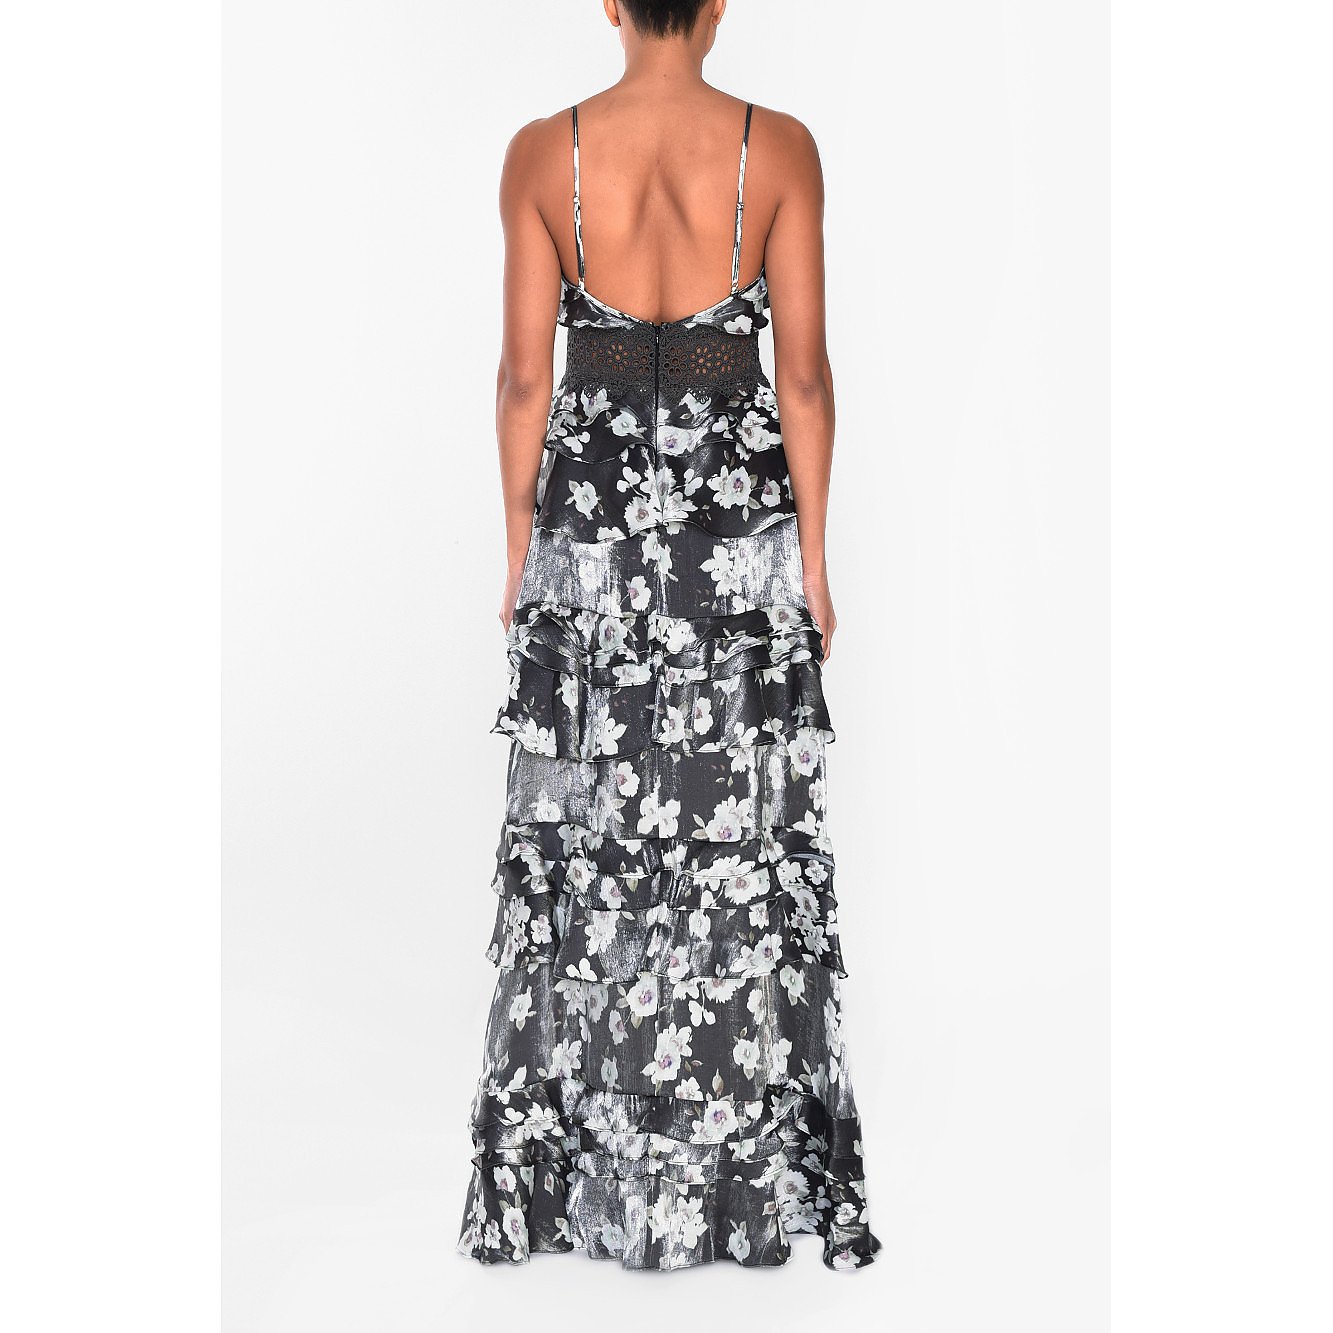 True Decadence Floral Metallic Plunge Front Tiered Ruffle Maxi Dress